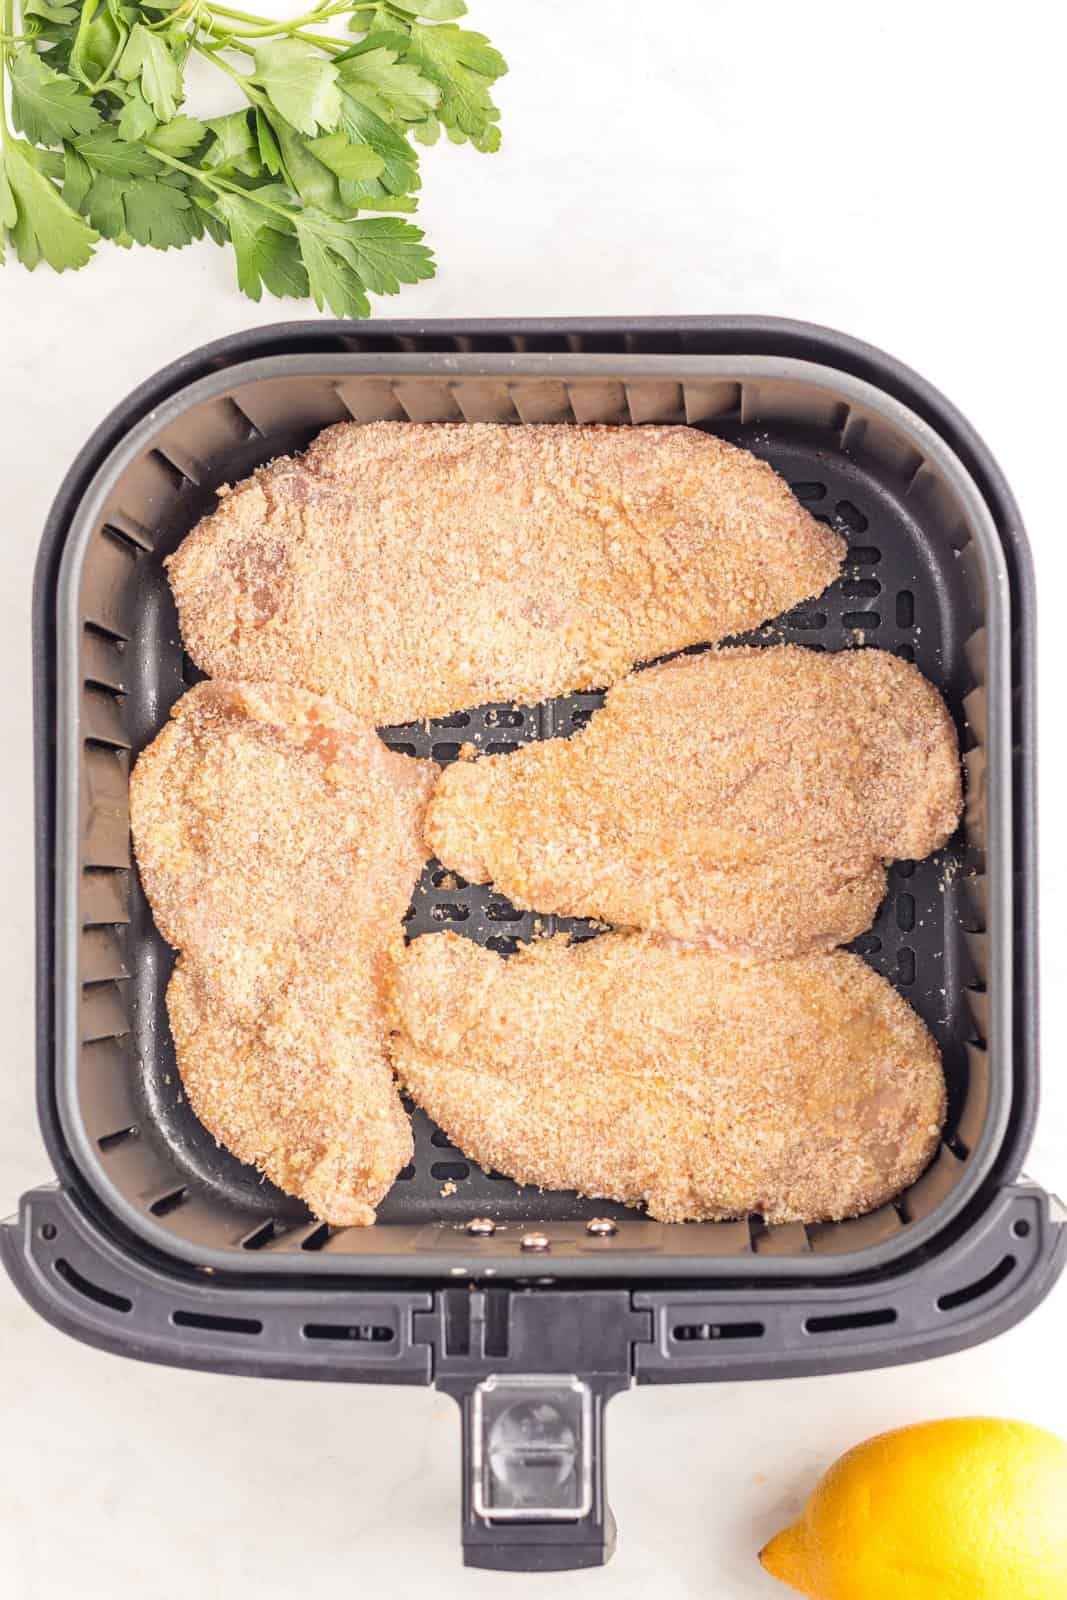 Cutlets placed into basket of air fryer.